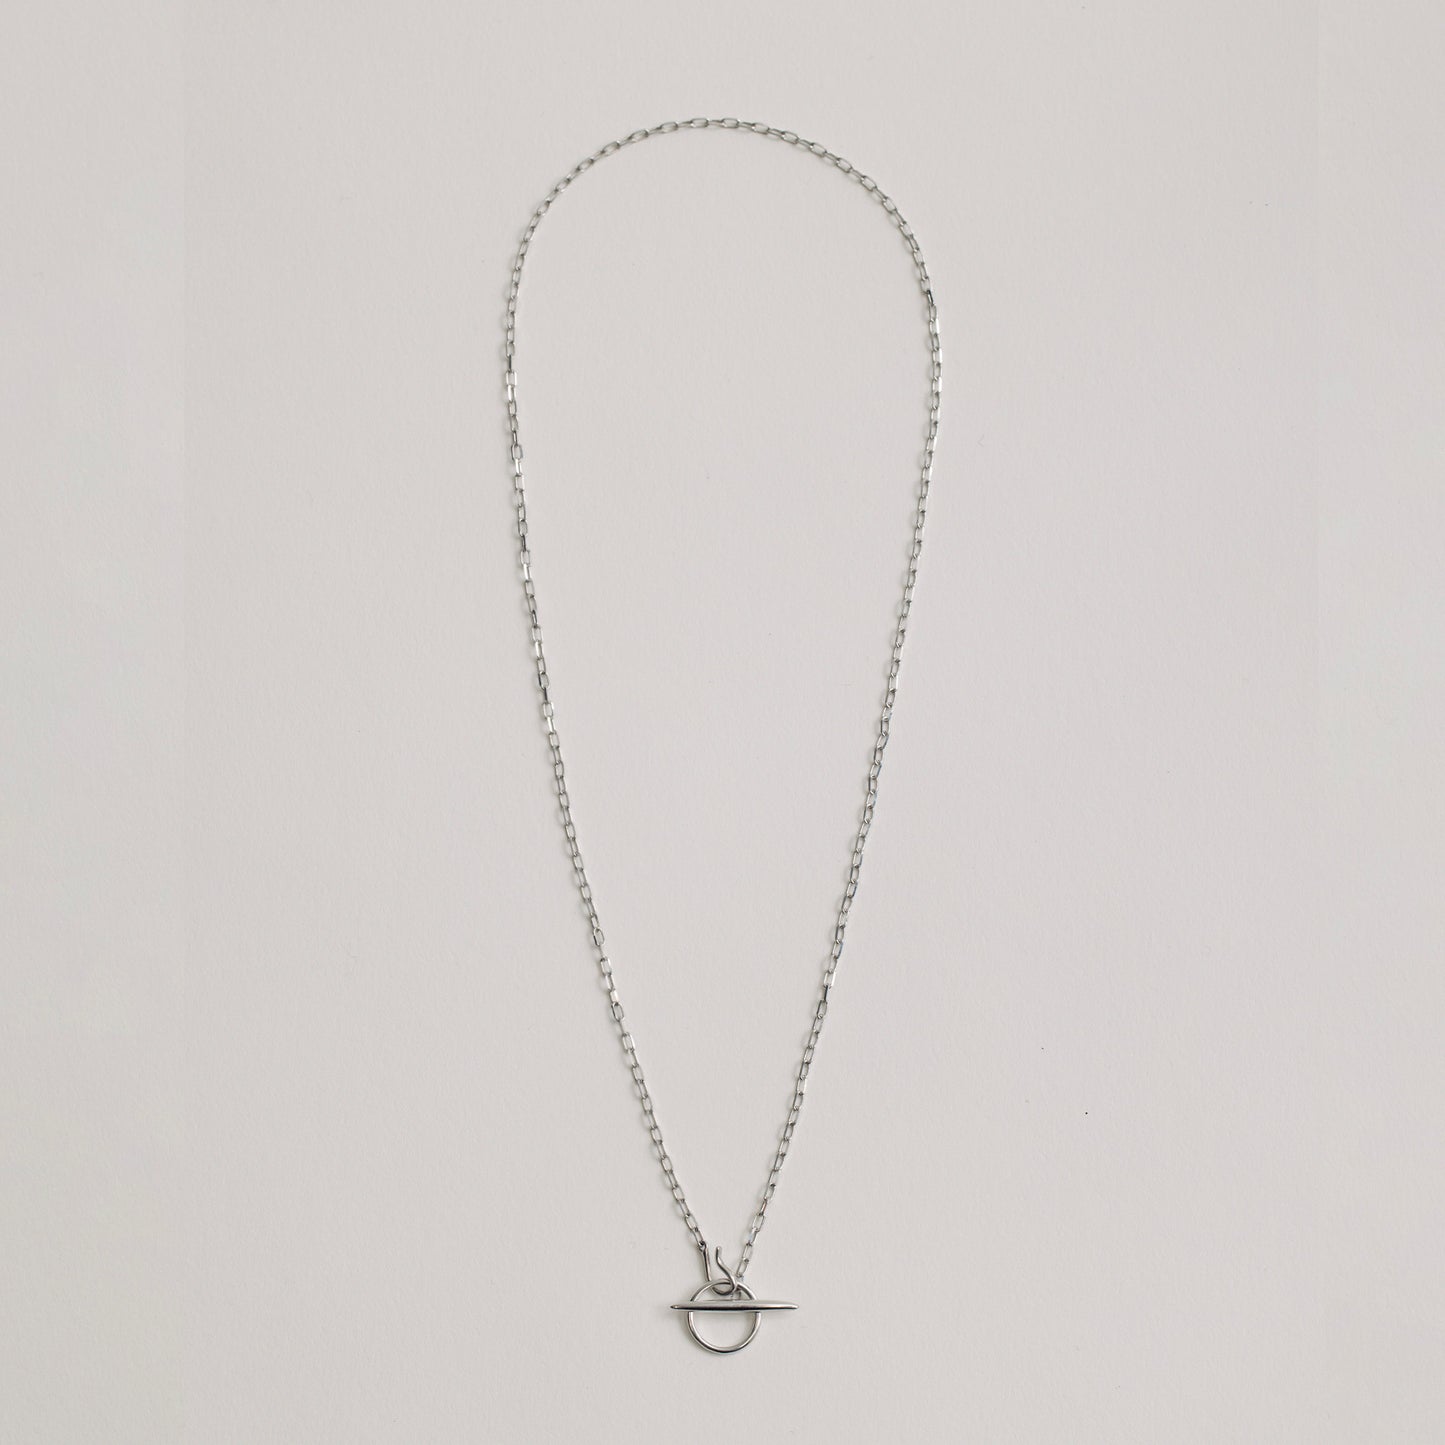 verusマタニティジュエリーセット シルバー（Babyring Silver × Necklace Silver）